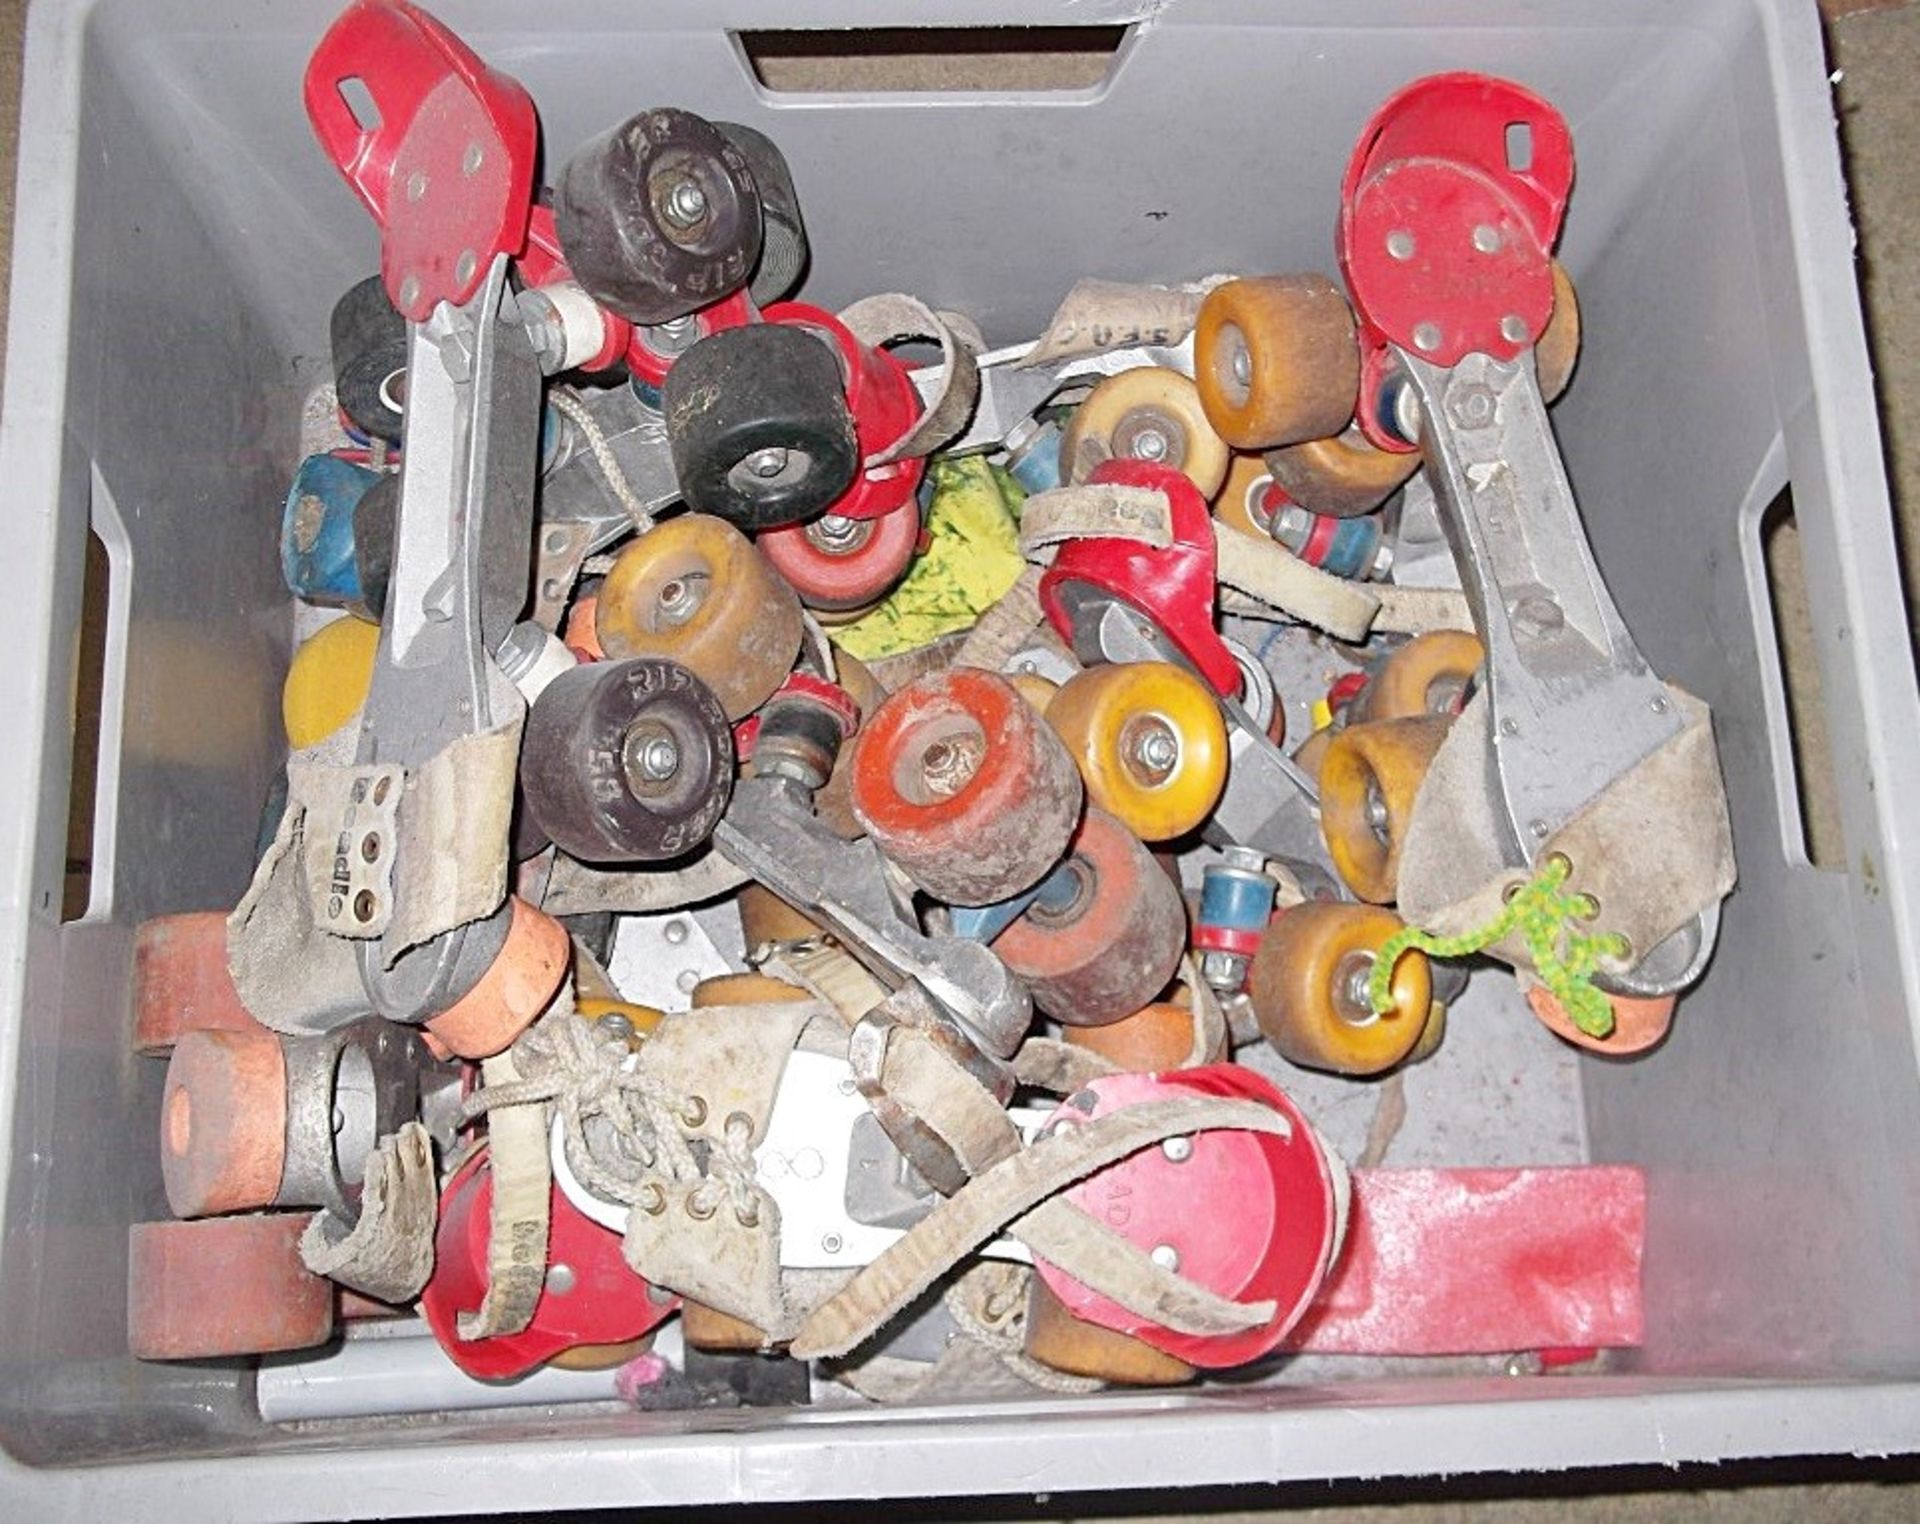 6 x Pairs Of "Beadle" Roller Skates - Vintage / Retro Goods - Various Sizes - Sold As Shown - - Image 4 of 4